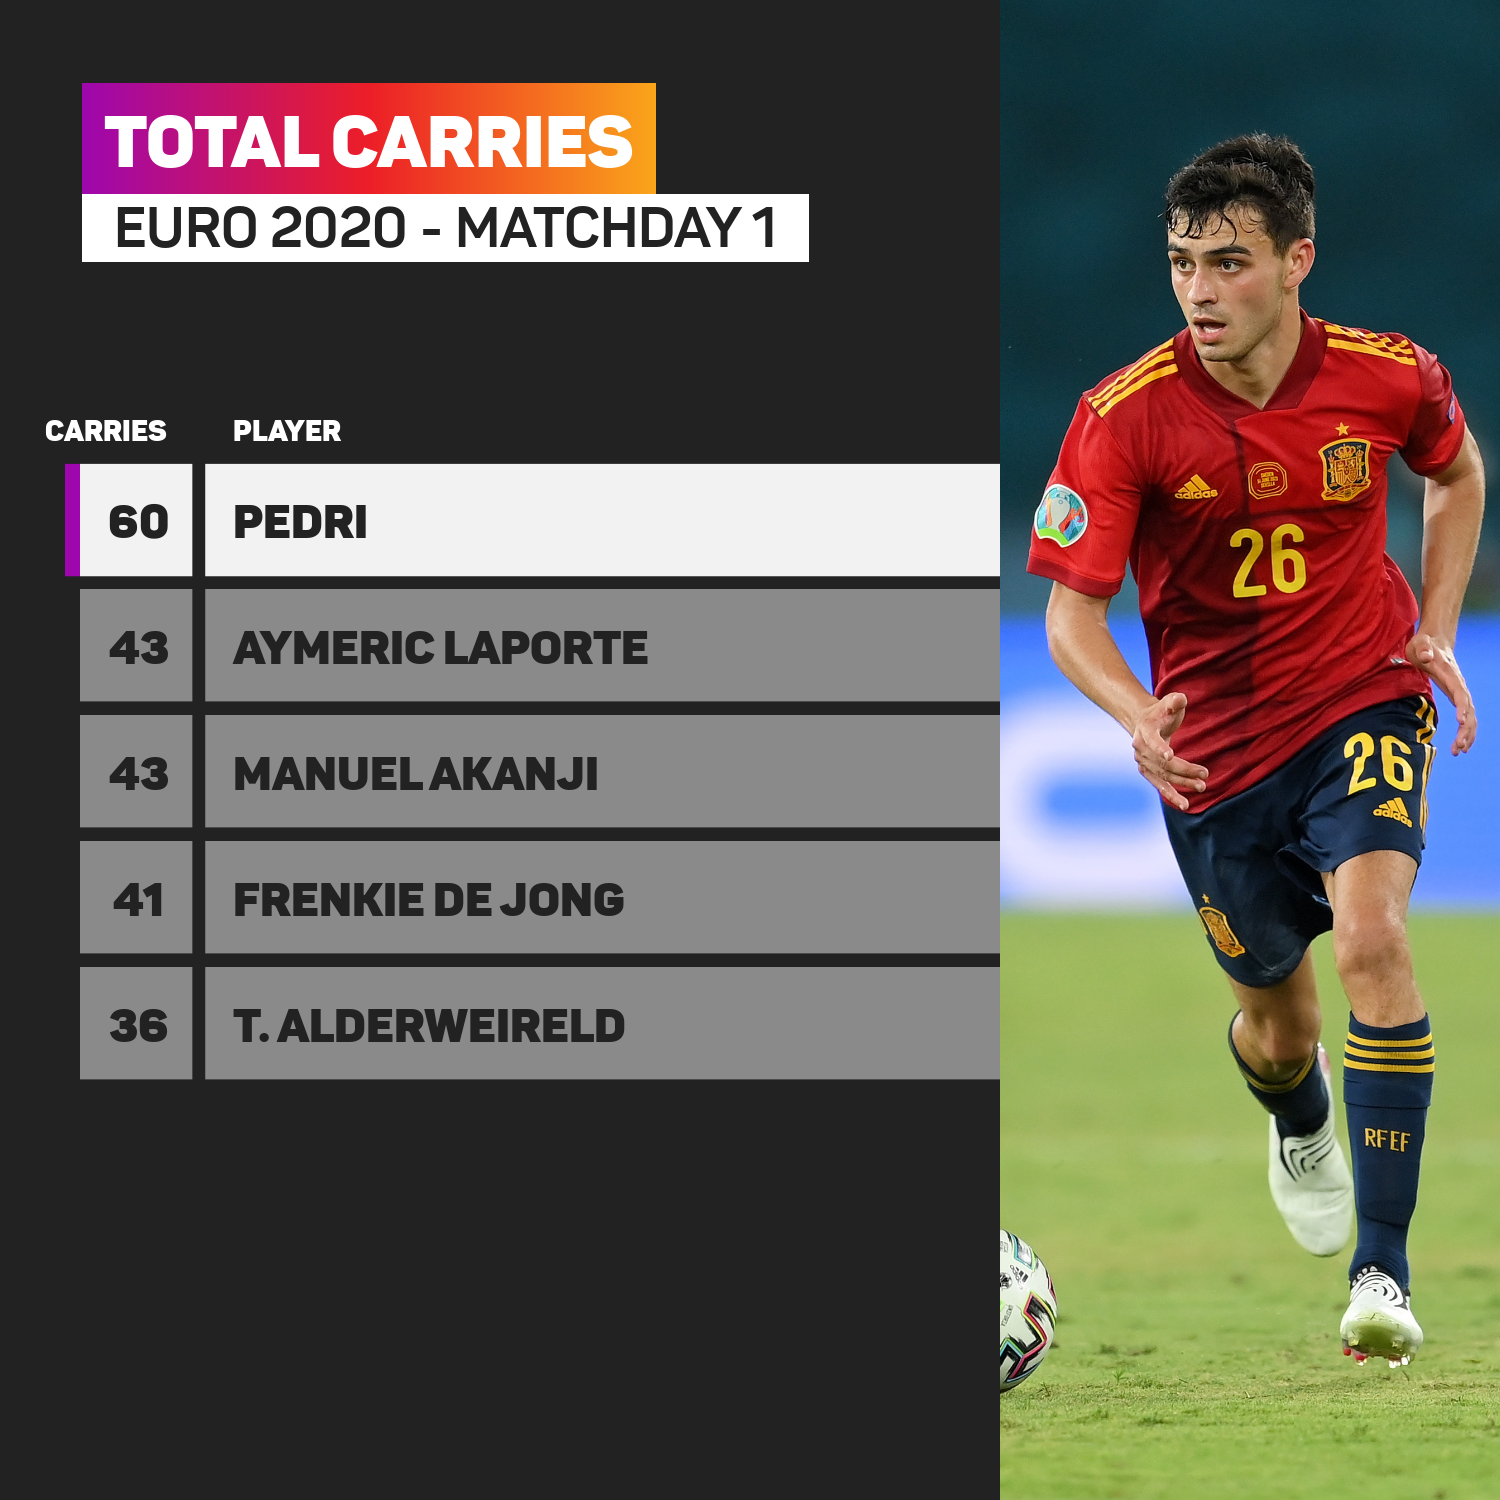 Pedri had more ball carries than any other player on matchday one